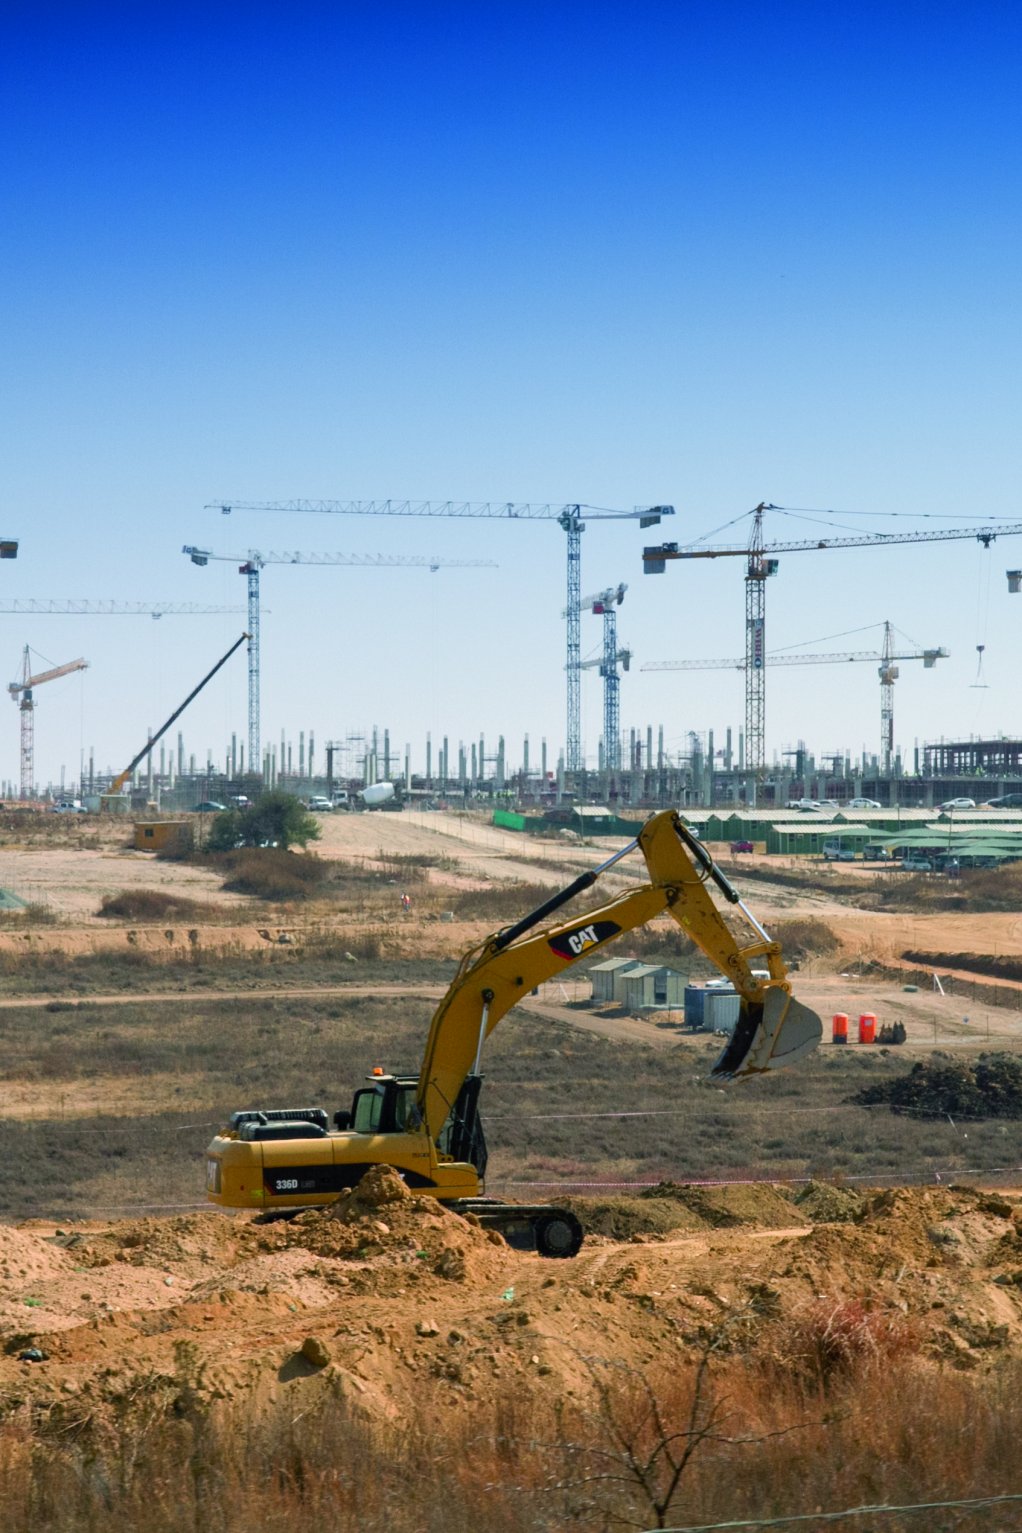 COMPLEX MANAGEMENT
Construction projects are often delayed by the complexity of management and administration